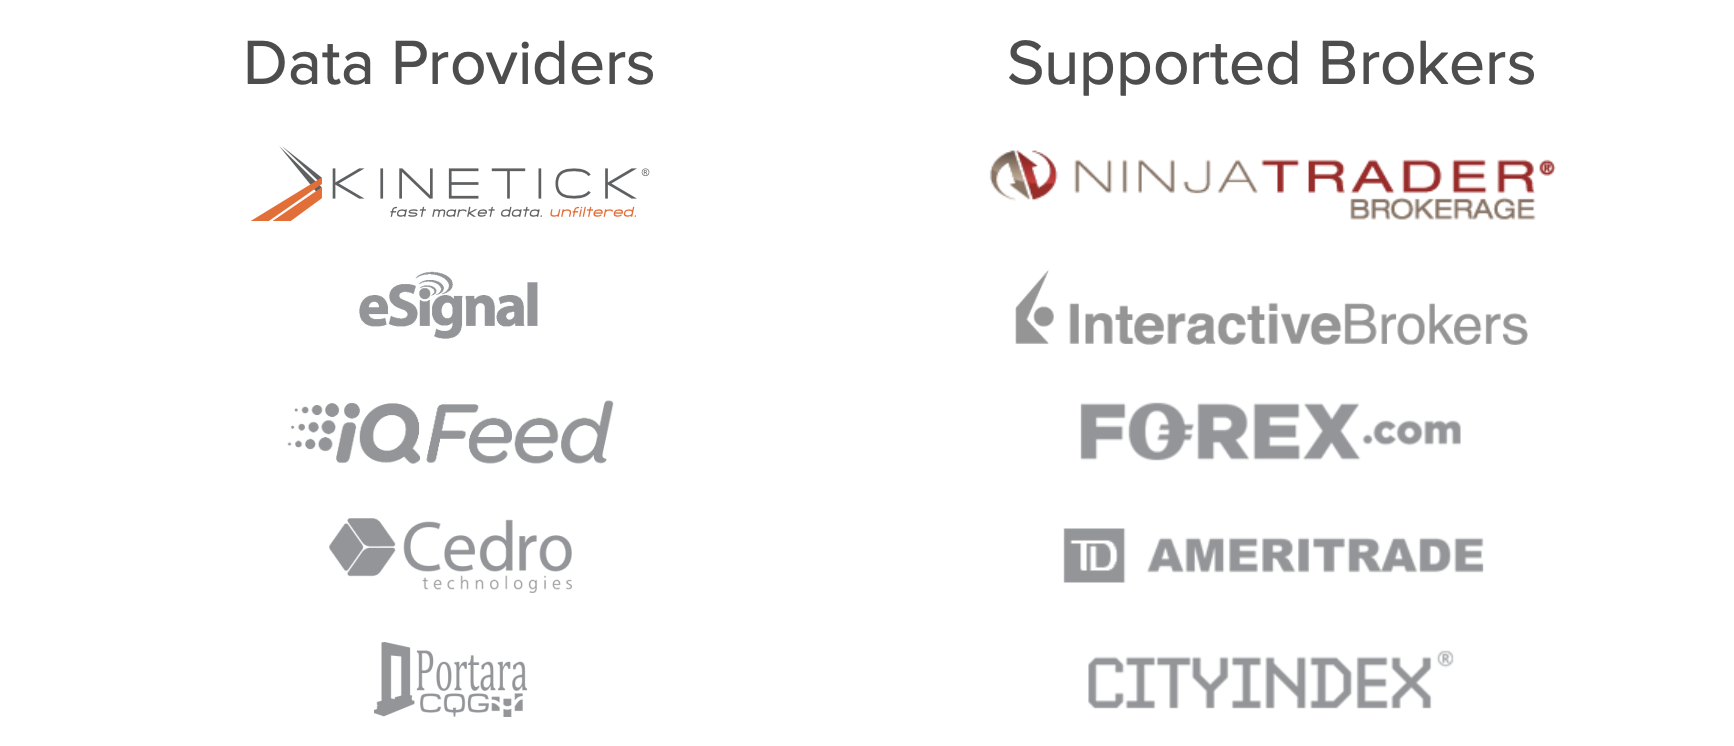 Data providers and supported brokers of NinjaTrader